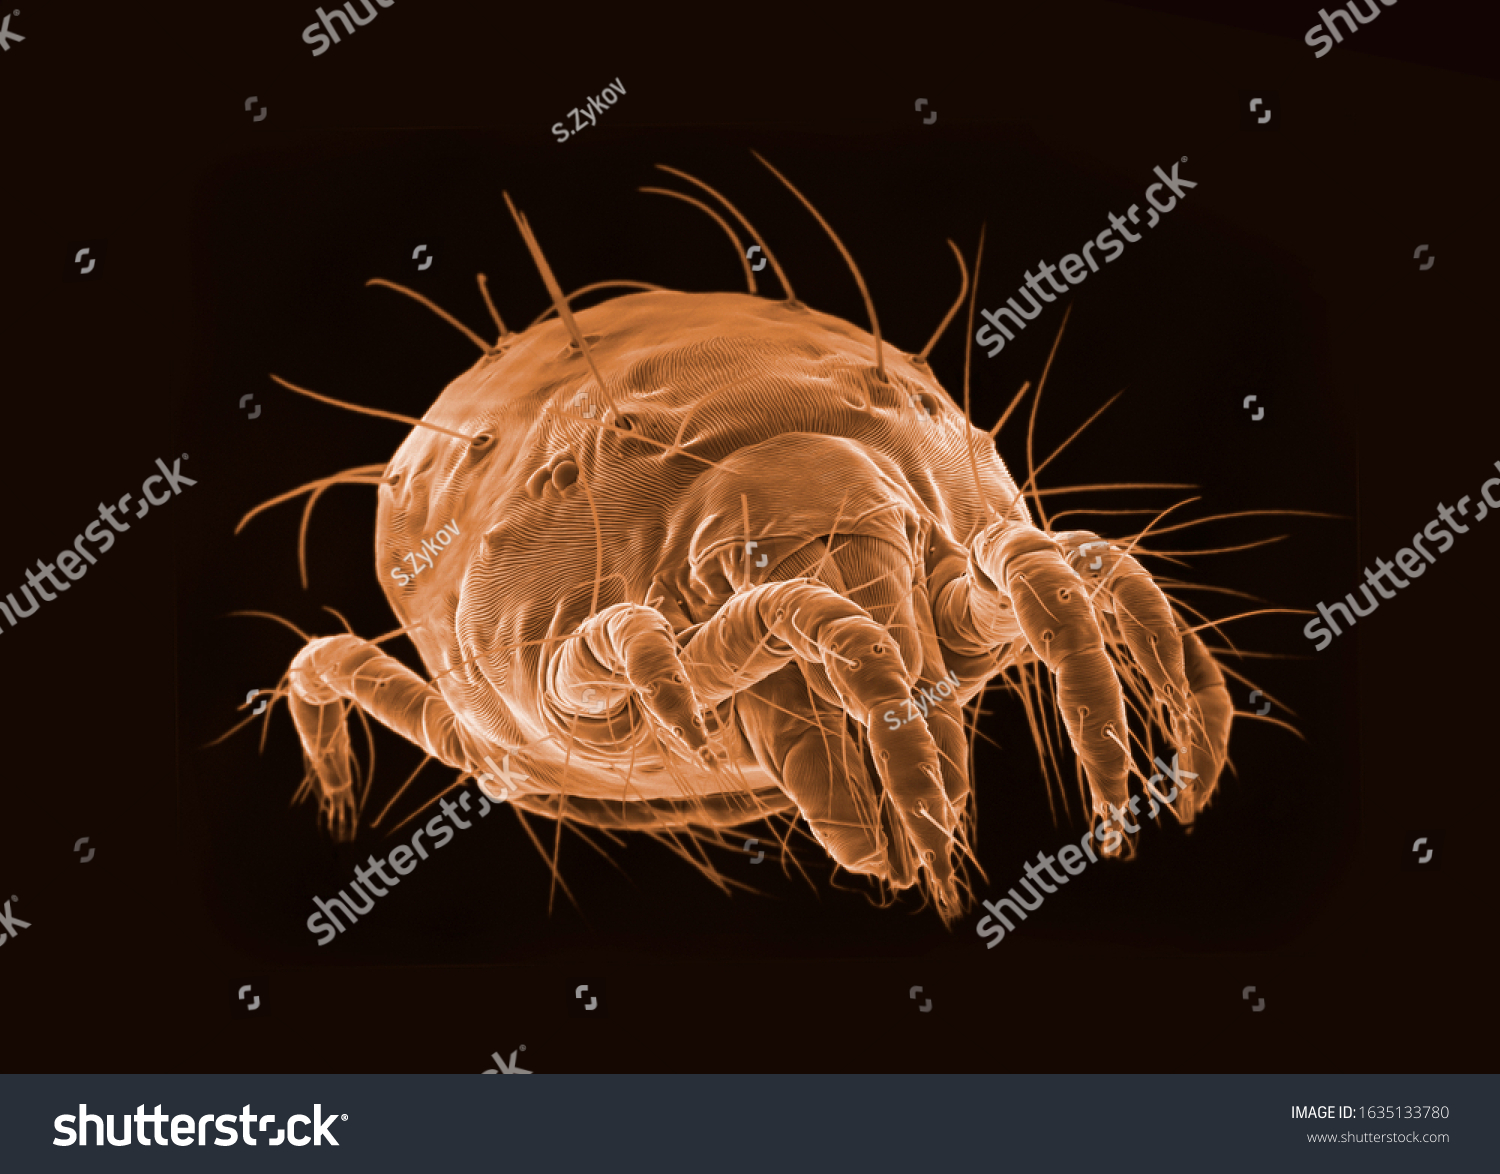 SEM micrography of a microscopic tick on black background #1635133780